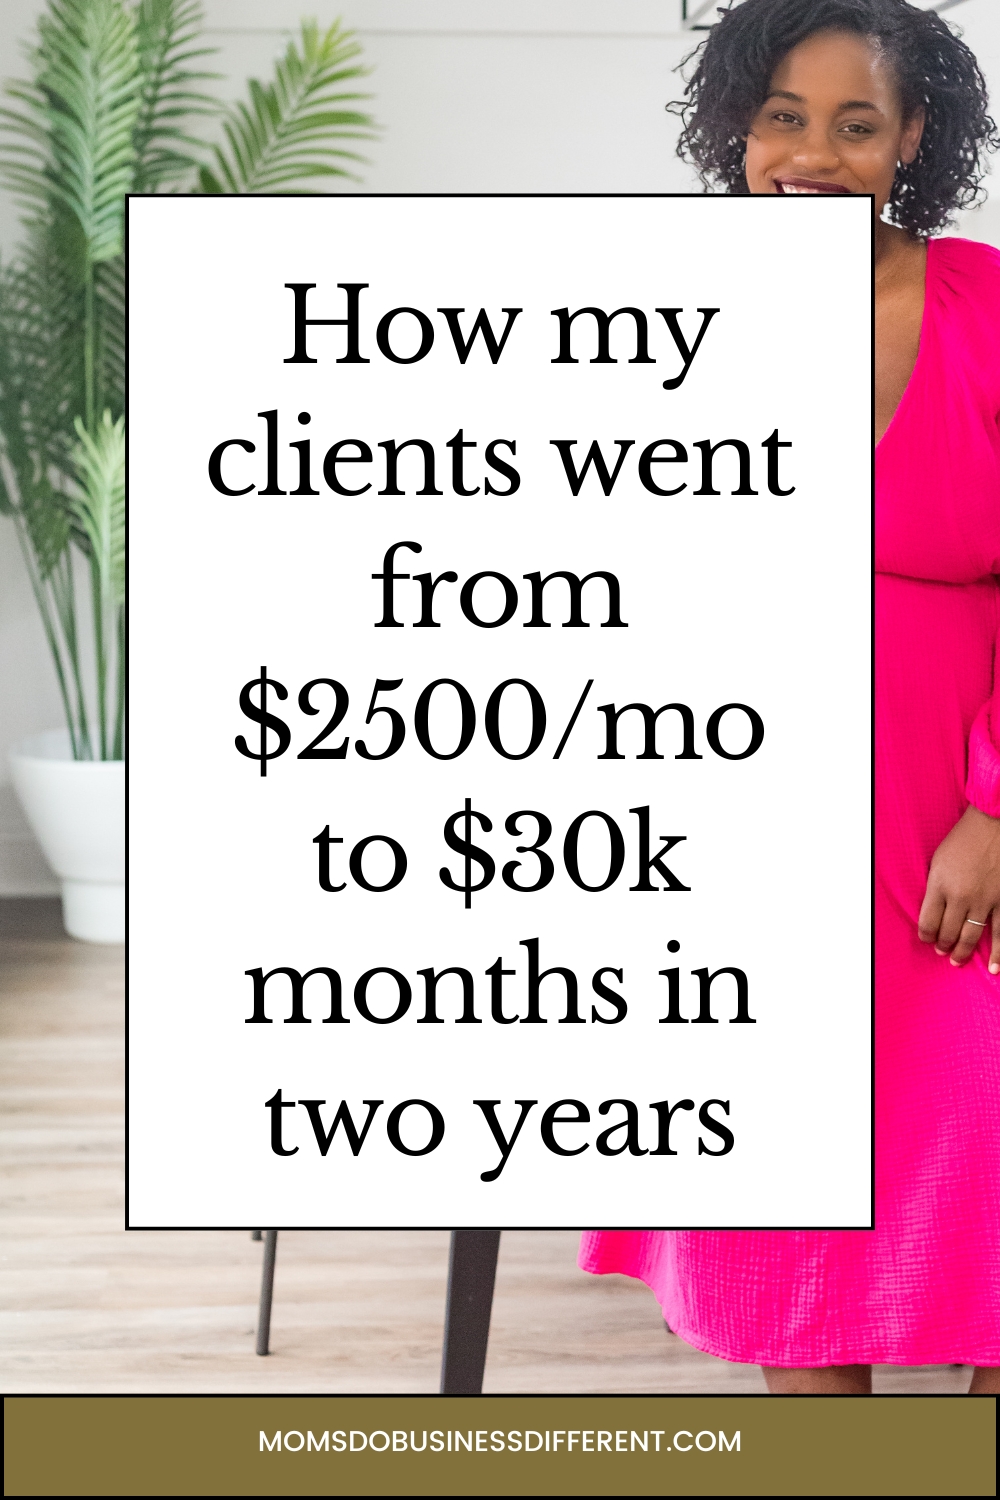 How my clients went from $2500/mo to $30k months in two years